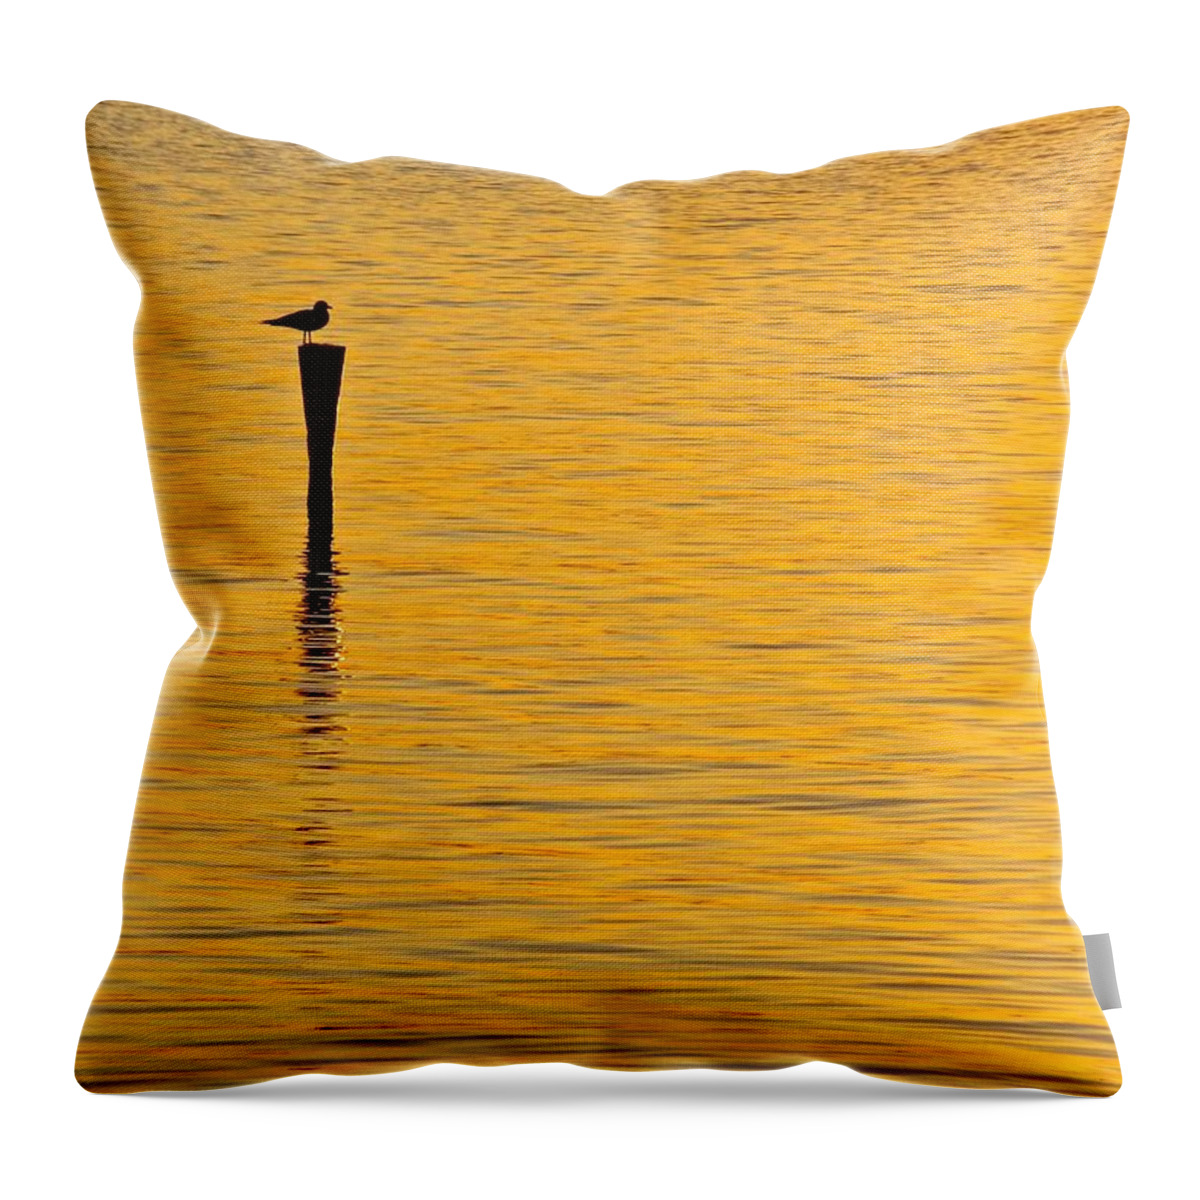 Sea Gull Throw Pillow featuring the photograph Solitude by Mike Reilly